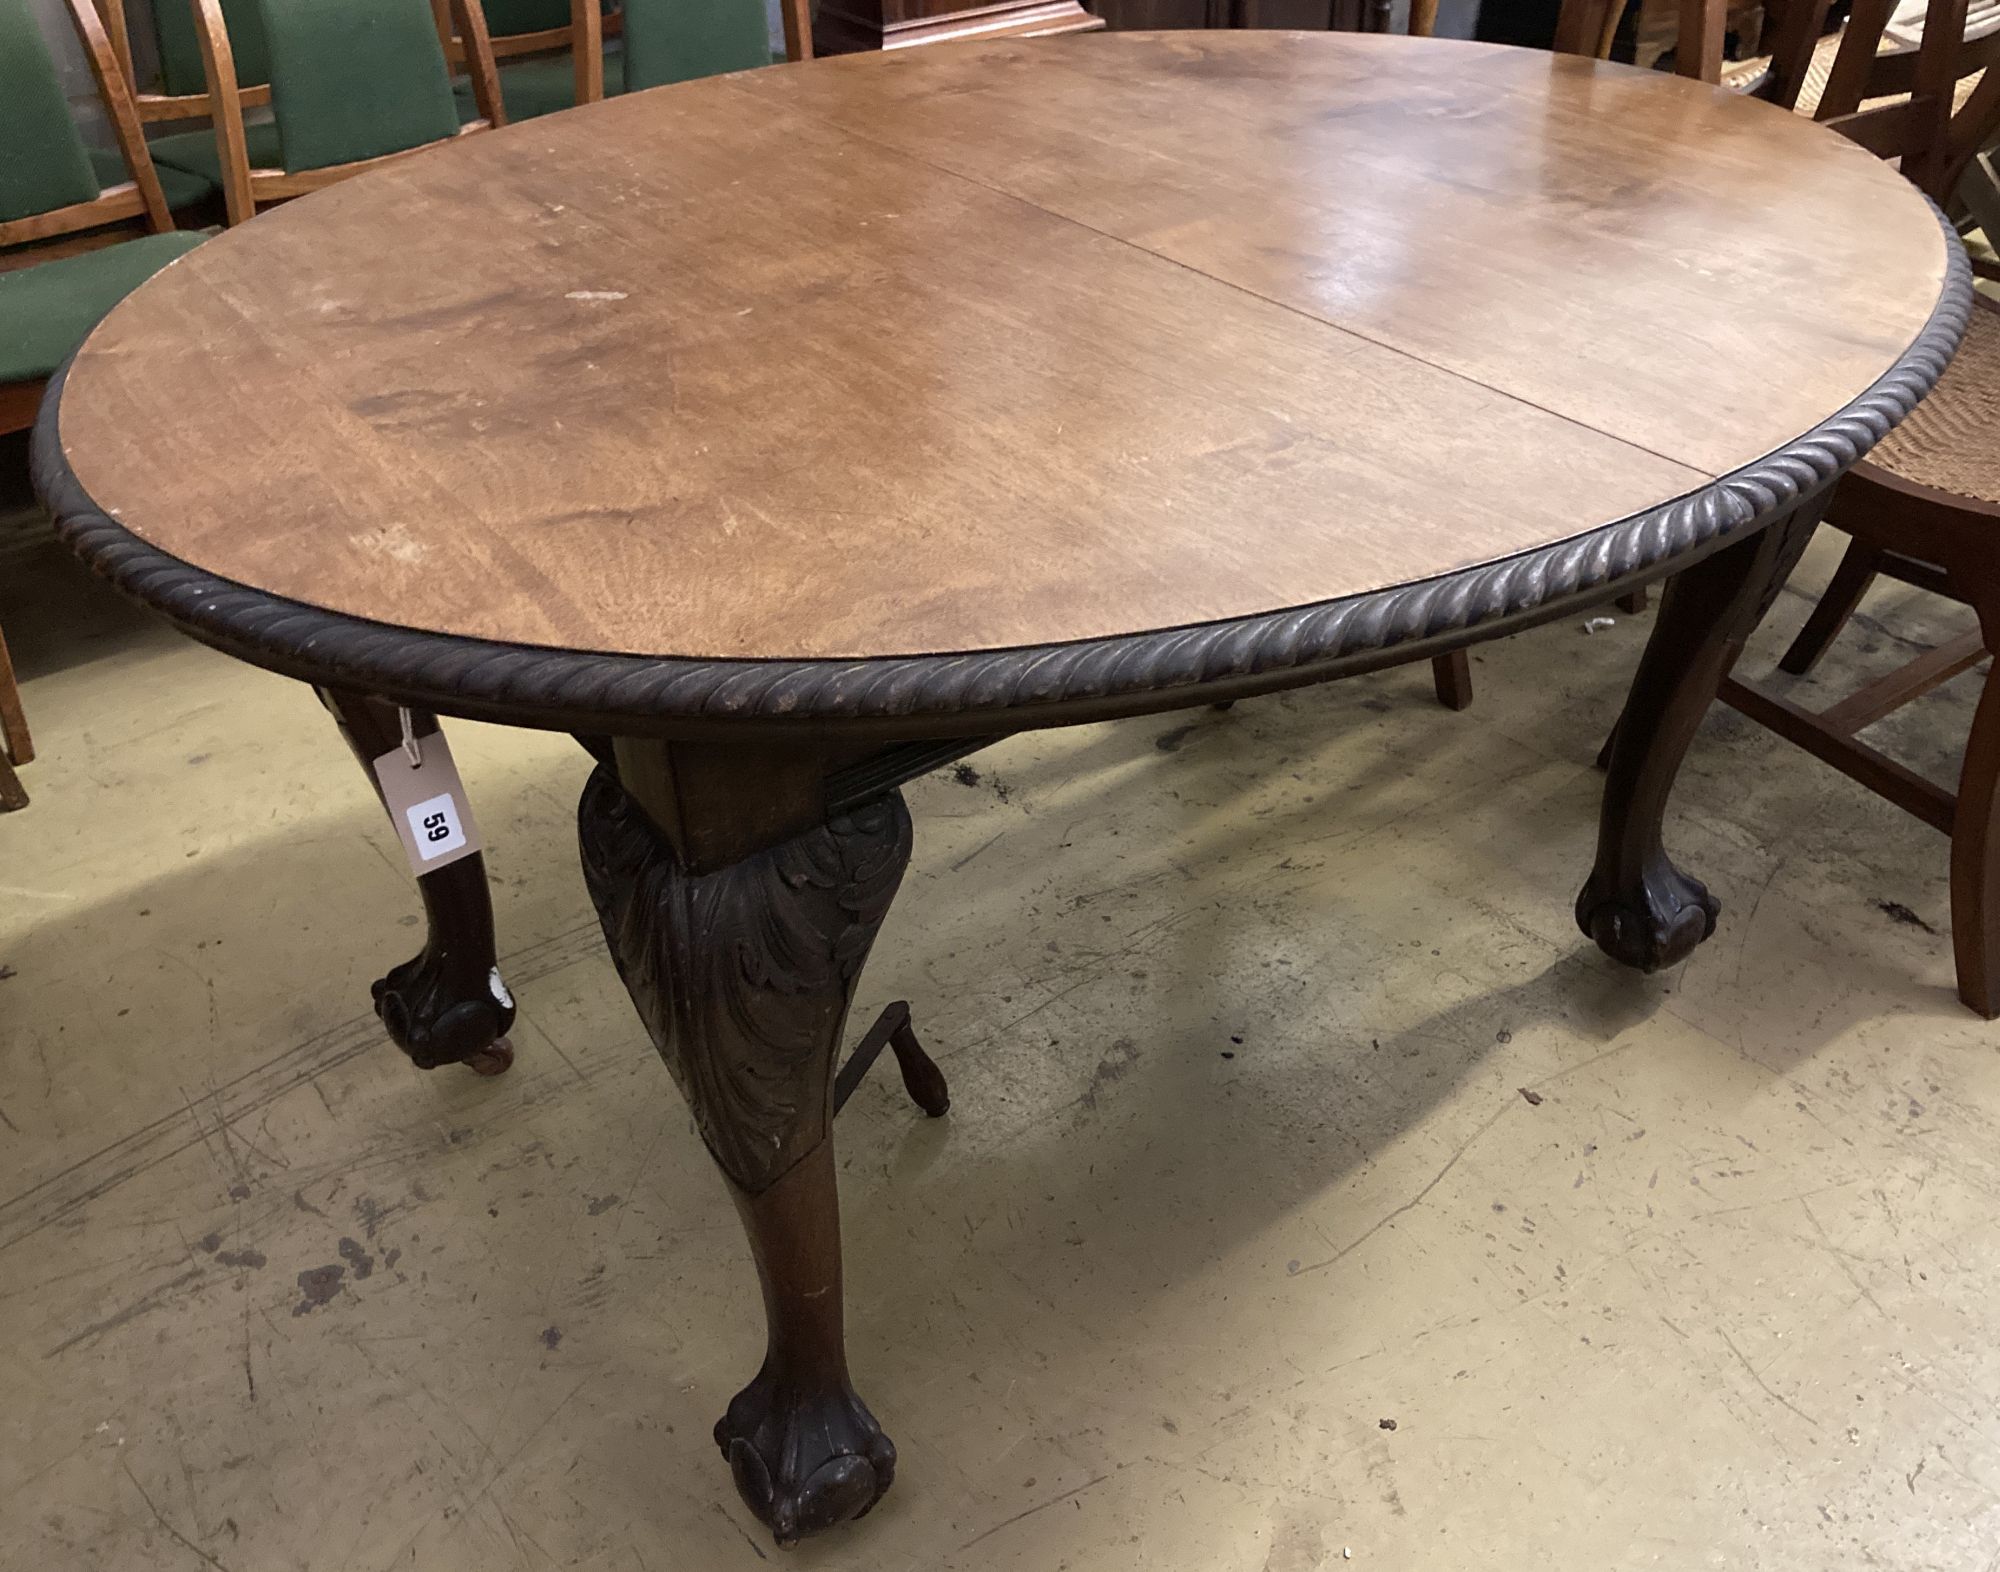 A 1920s oval extending Victorian dining table, winder, no leaves, length 132cm, depth 106cm, height 74cm